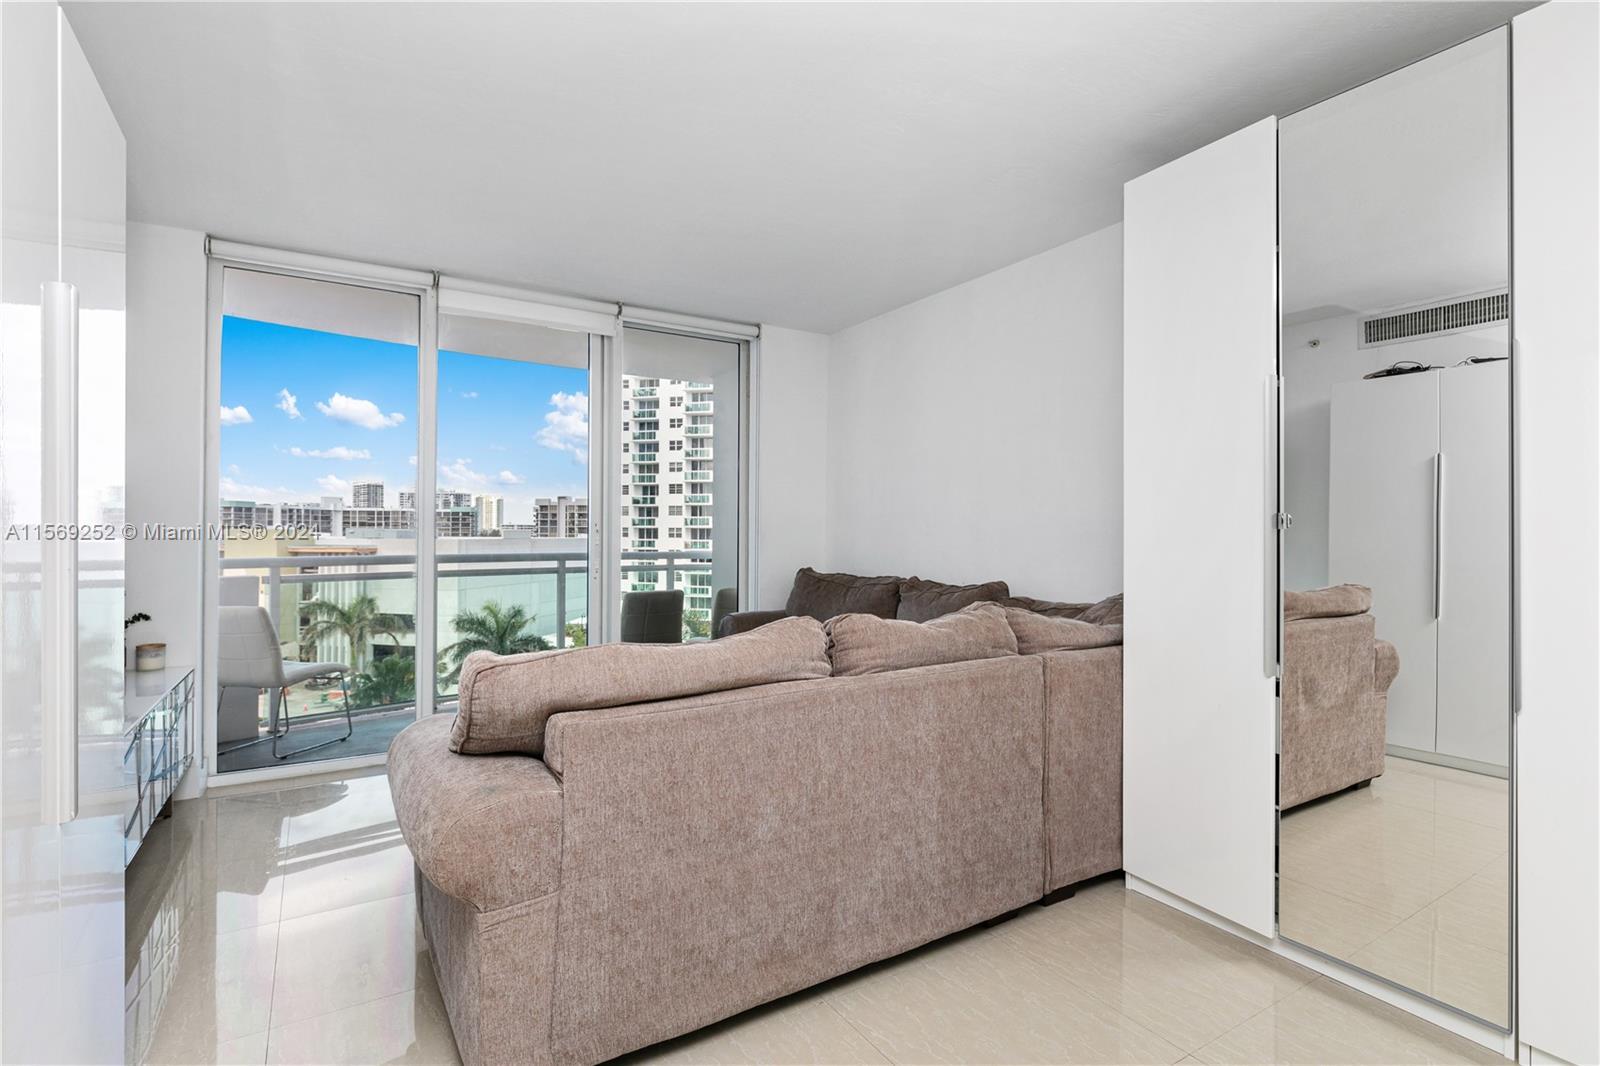 Photo of 3001 S Ocean Dr #737 in Hollywood, FL